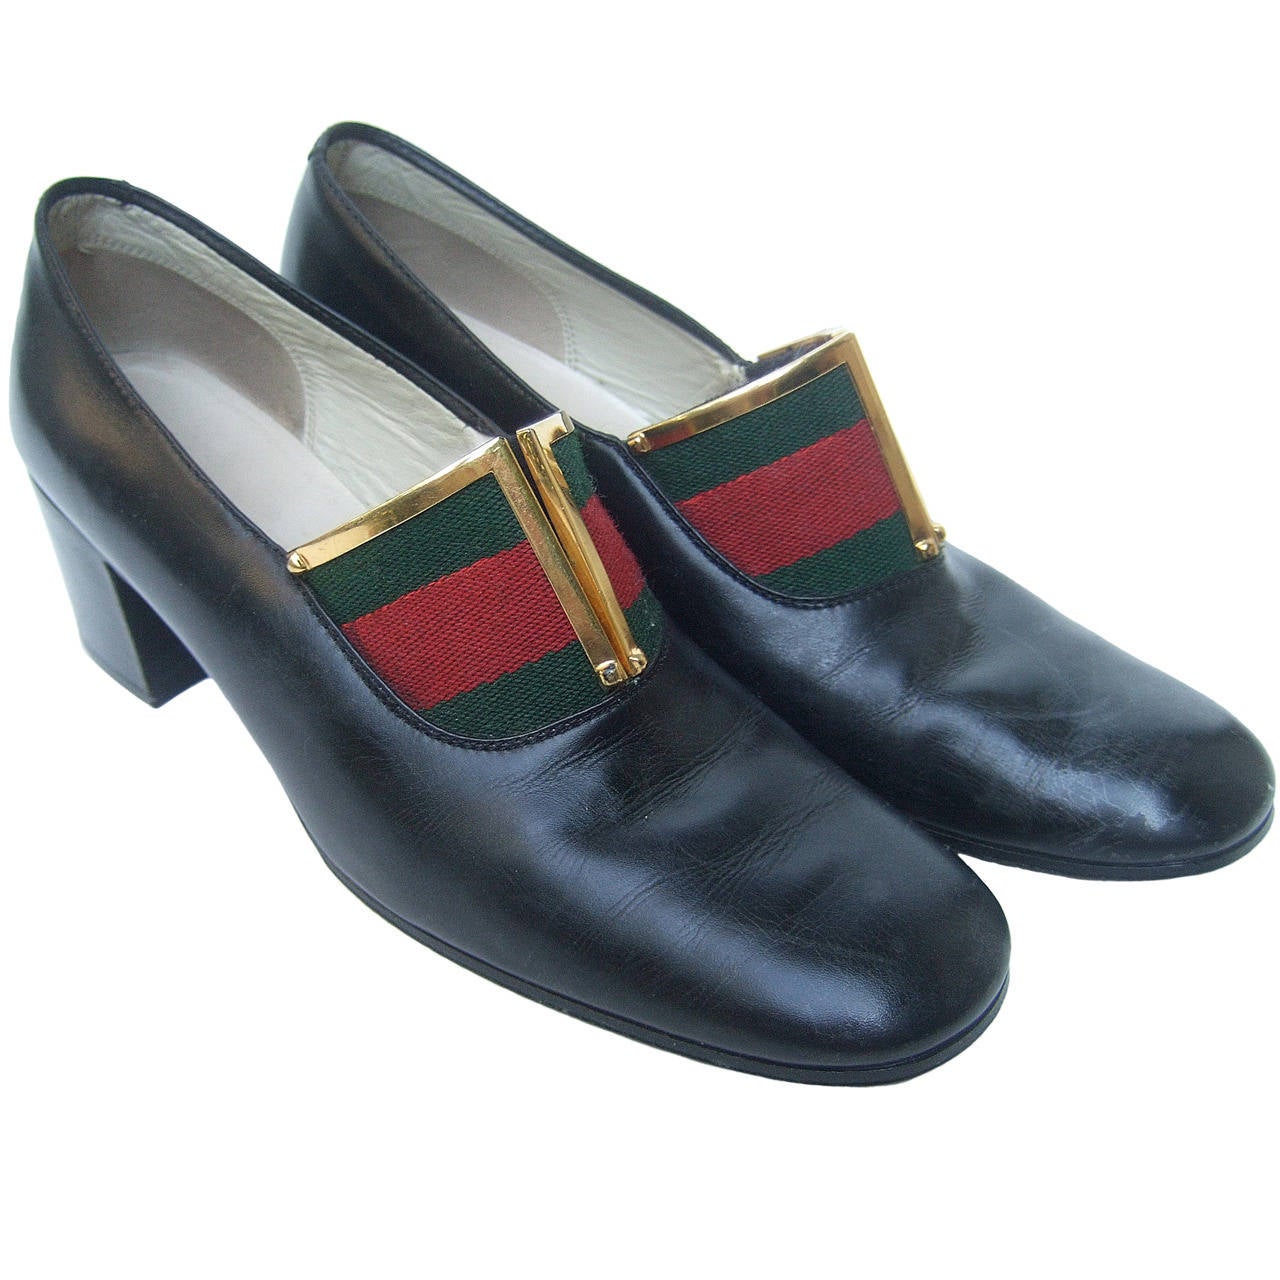 Gucci Italy Ebony Leather Striped Trim Shoes Size 38 AA c 1970